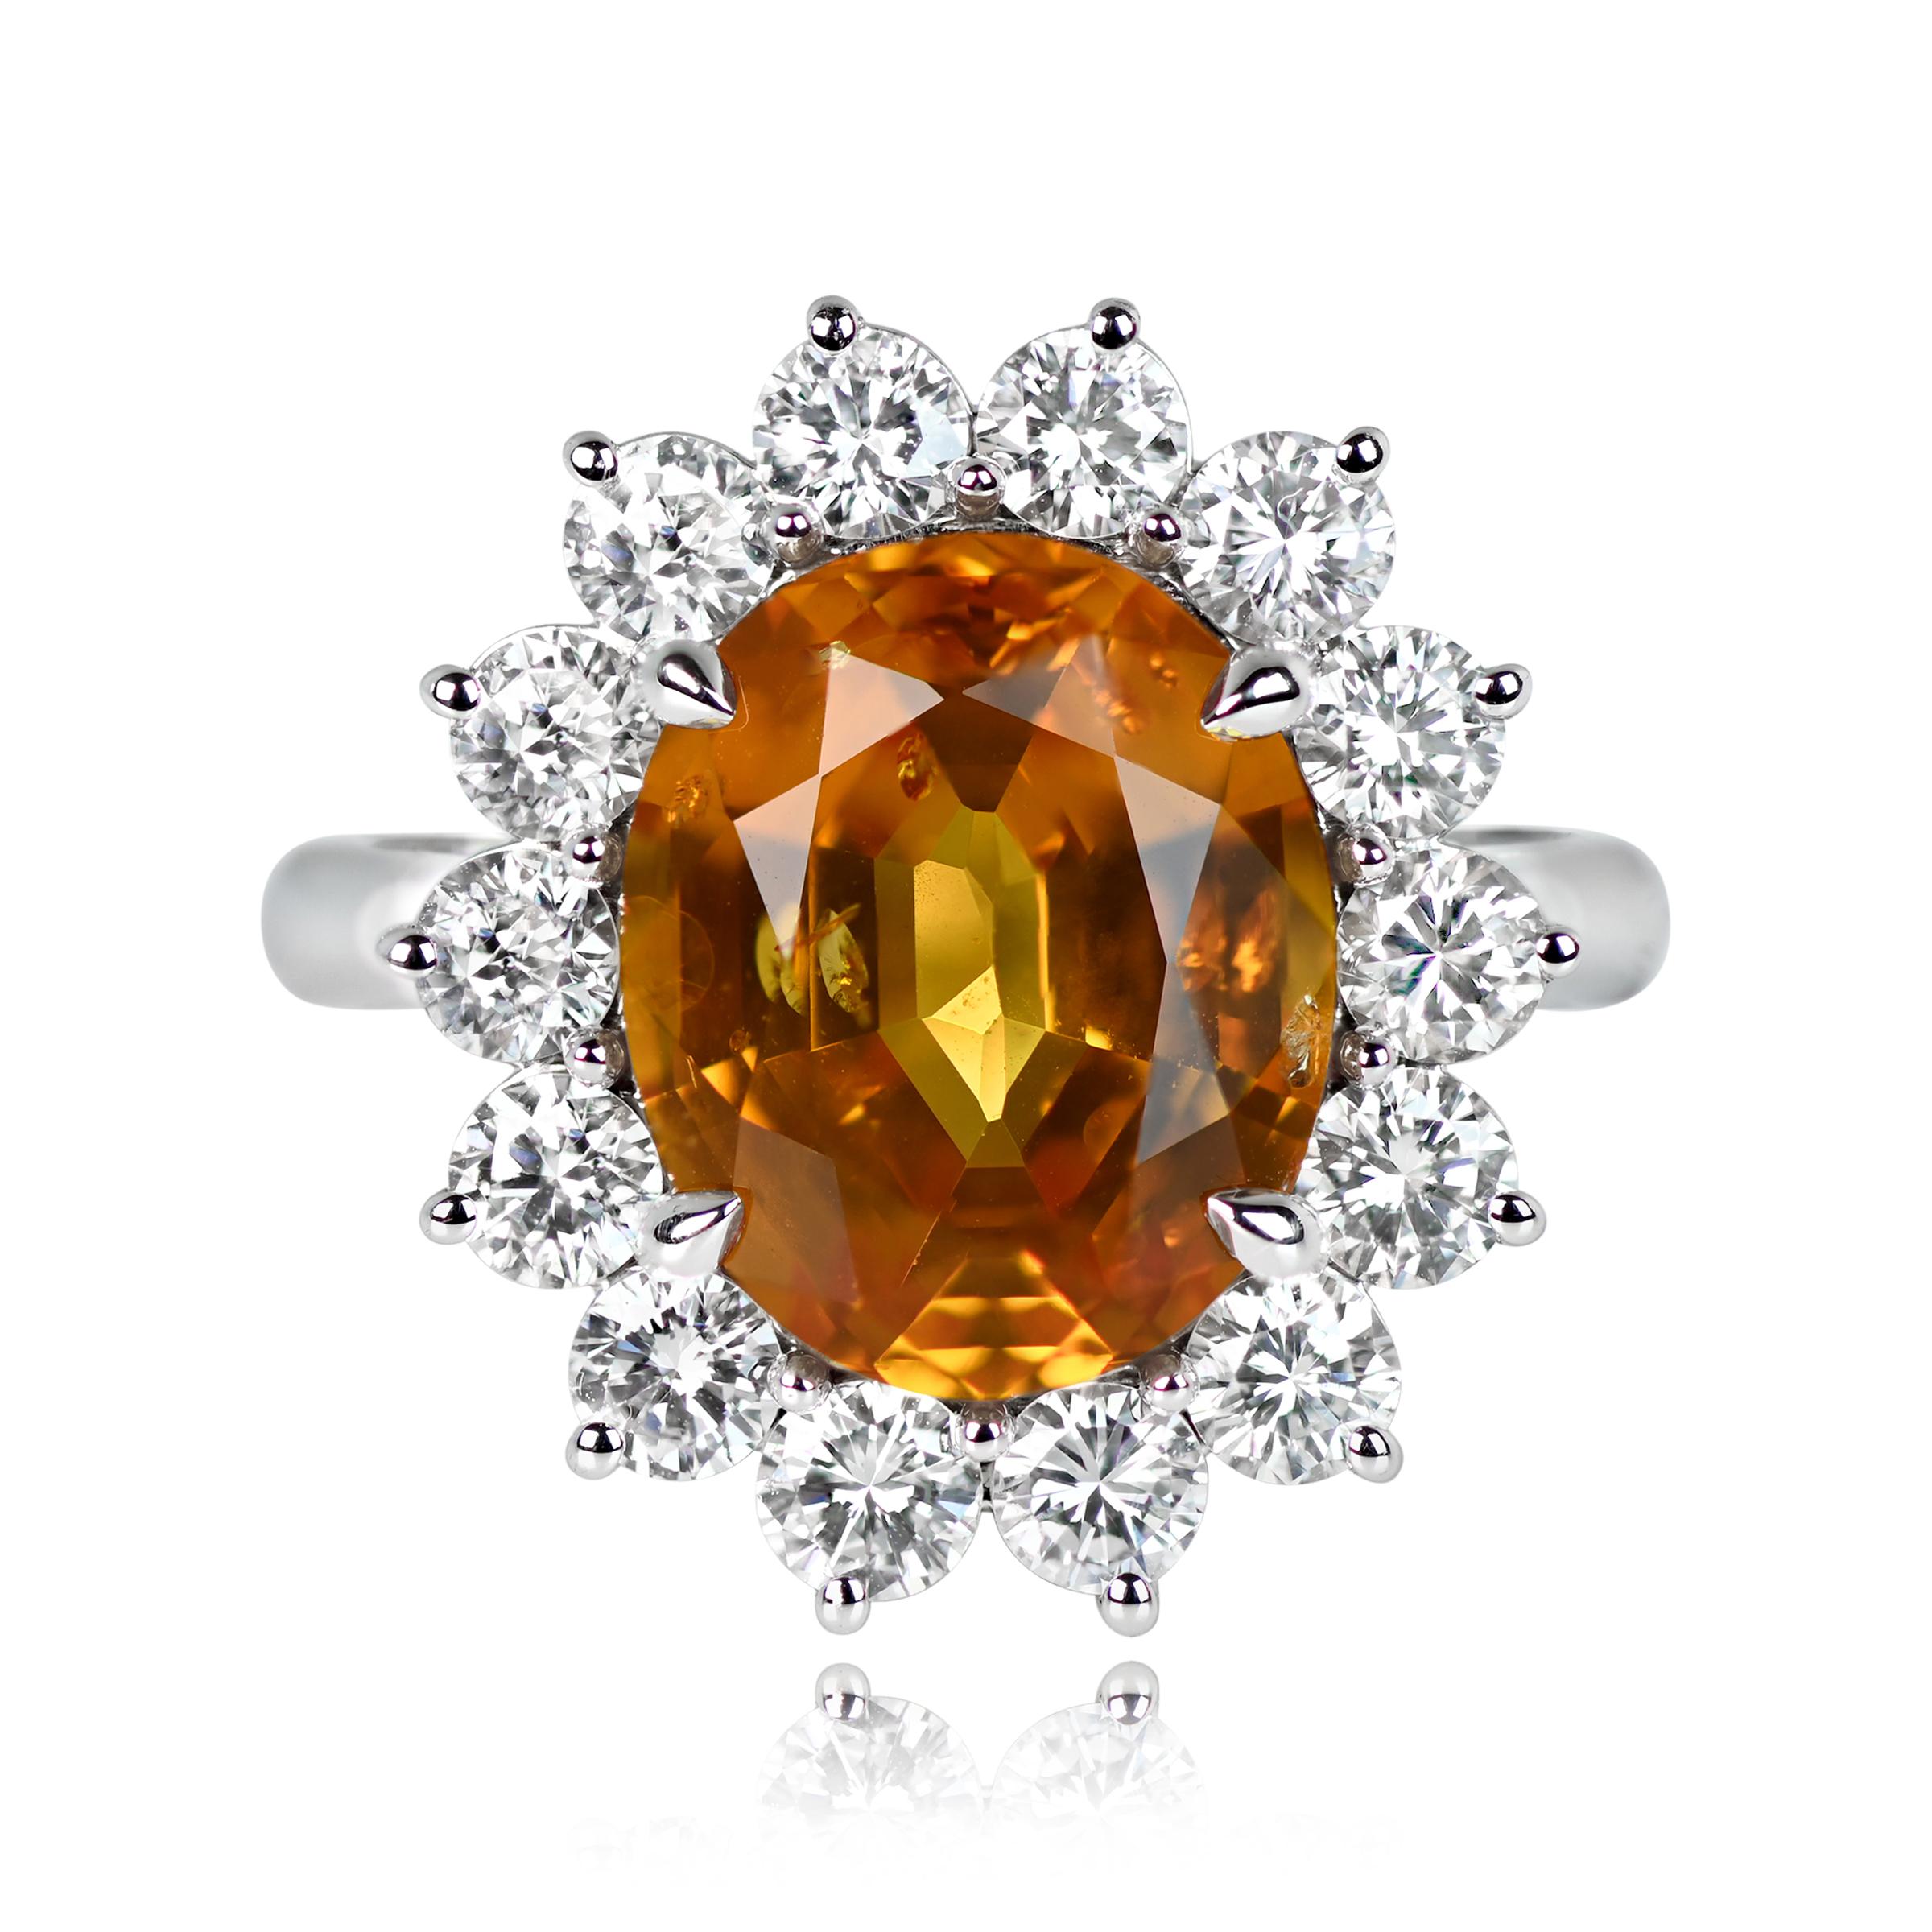 A 5.46 carat oval-cut yellow sapphire takes center stage in this ring, held securely in prongs. Surrounding the sapphire is a dazzling halo of prong-set round brilliant diamonds, totaling 1.36 carats. Handcrafted in 18k white gold, this ring boasts